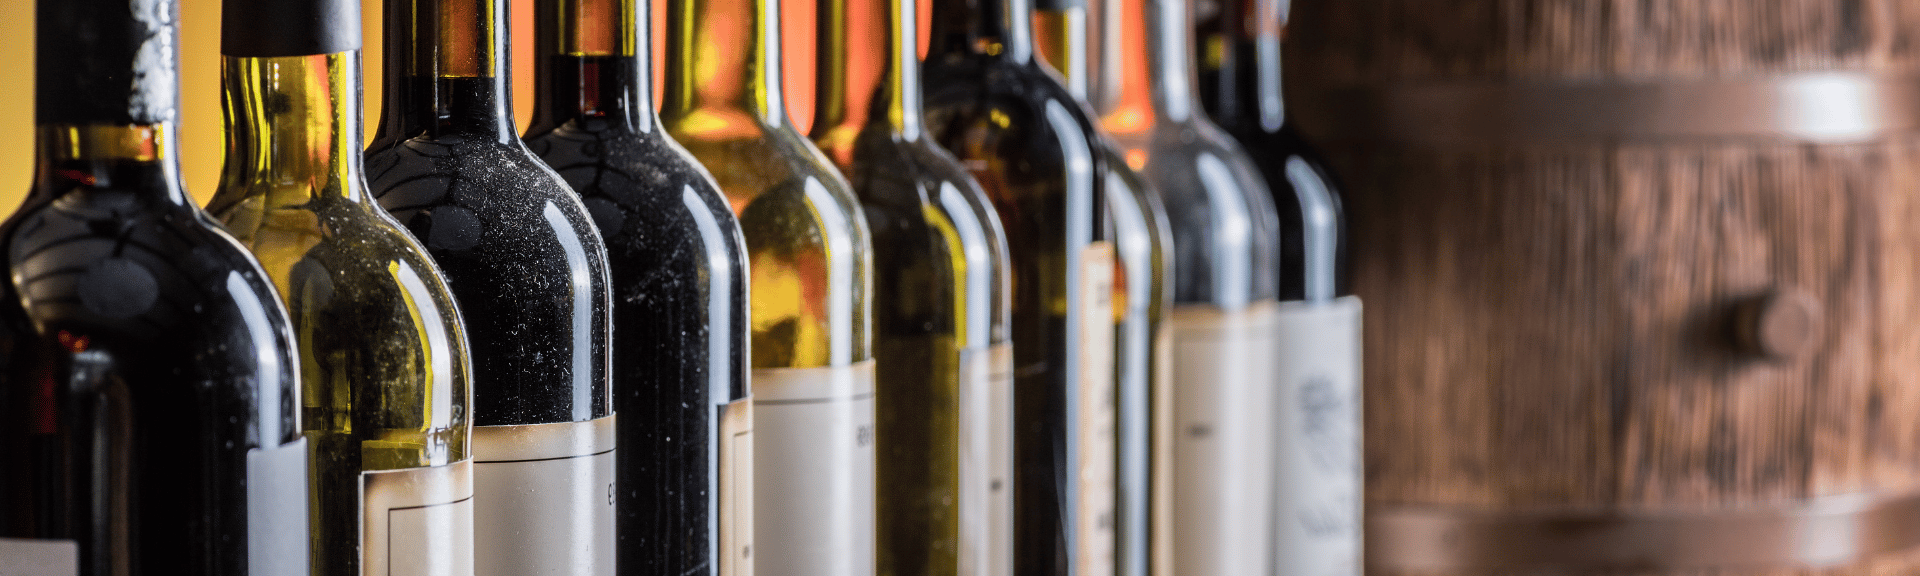 An image of wine bottles lined up